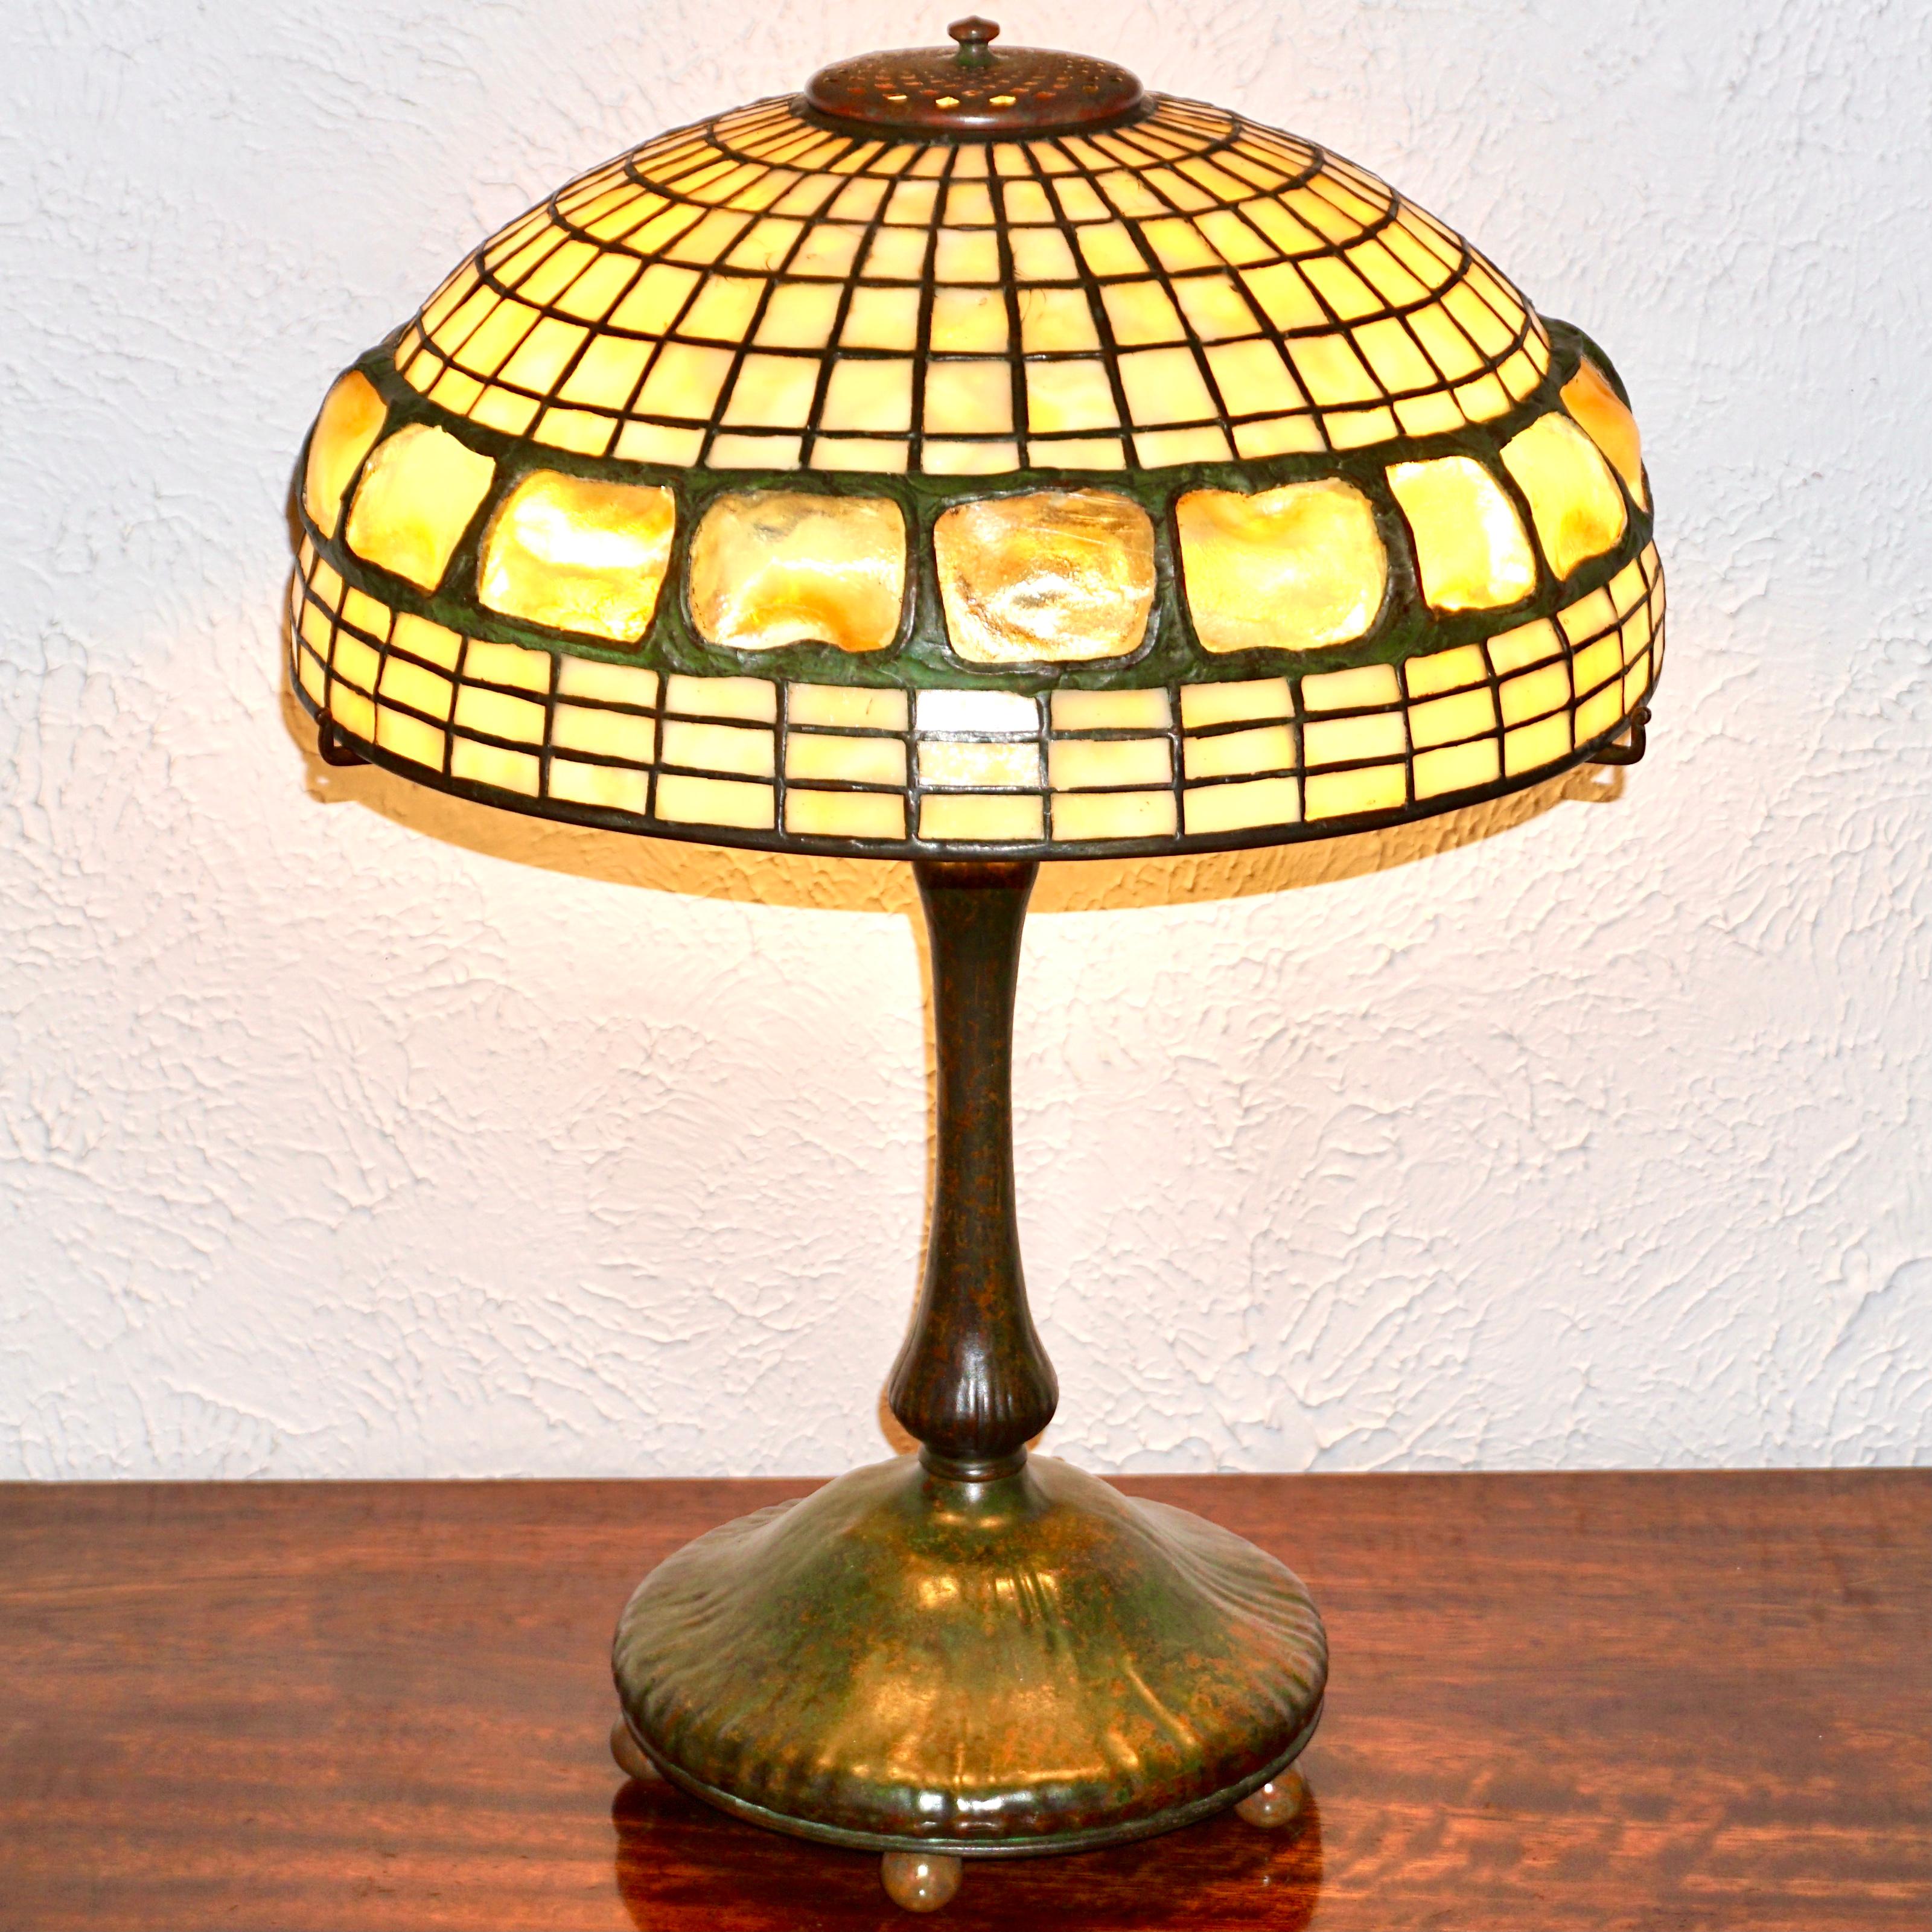 Tiffany Studios Art Nouveau Table lamp having turtle back and geometric shade with brown and green patinated bronze mushroom base. Turtle back glass chunks are iridescent and cased set in a leaded band with geometric square dichromatic glass design